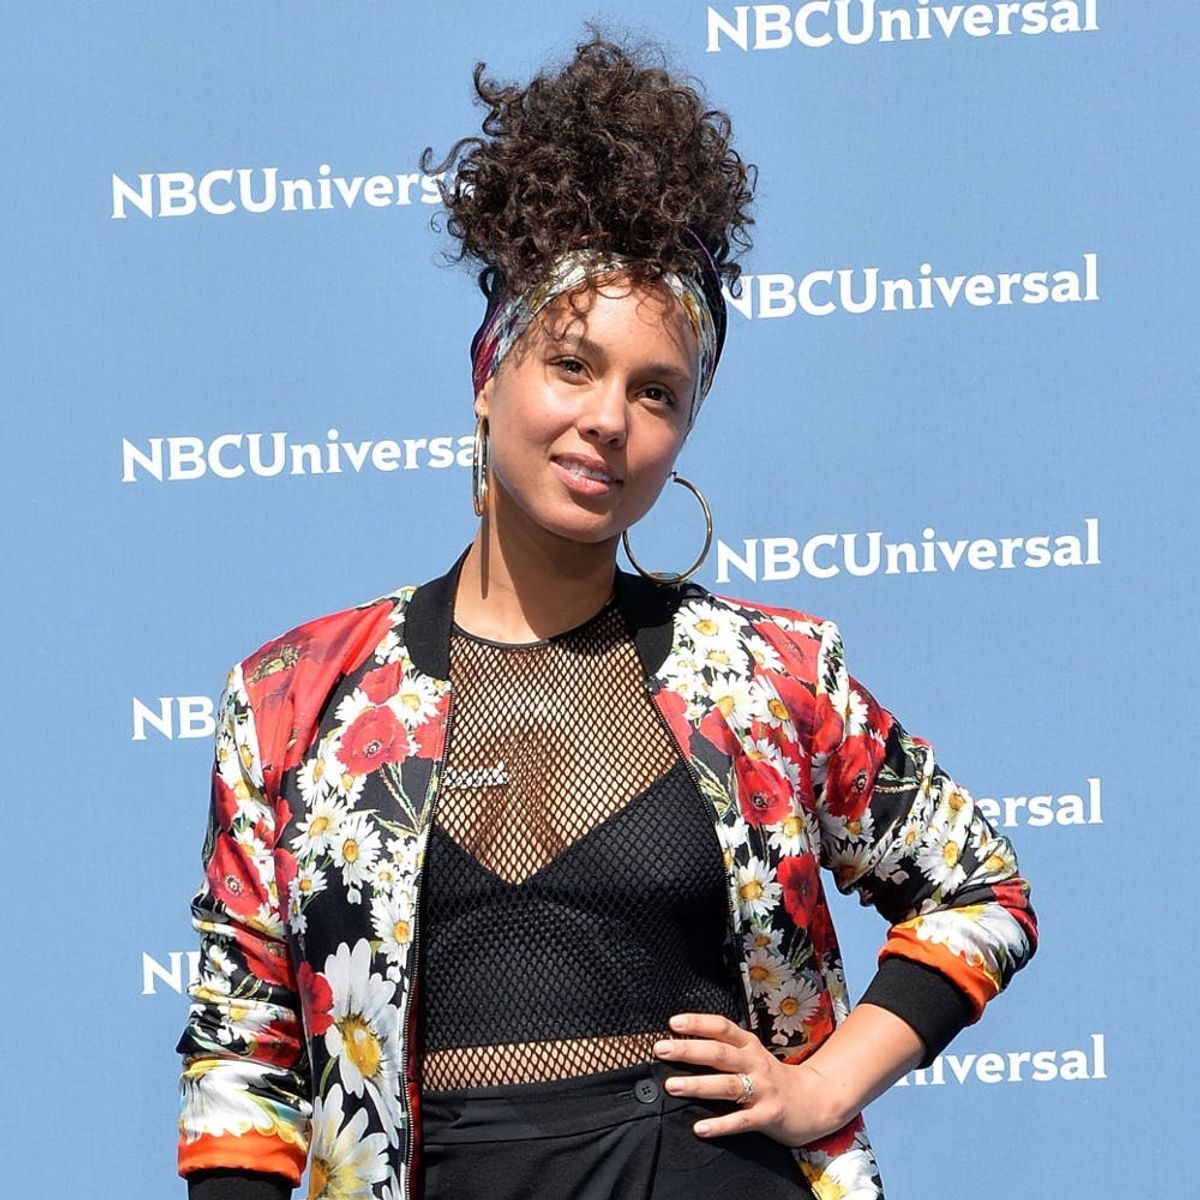 Find Out Why Alicia Keys Has Decided to Ditch Makeup